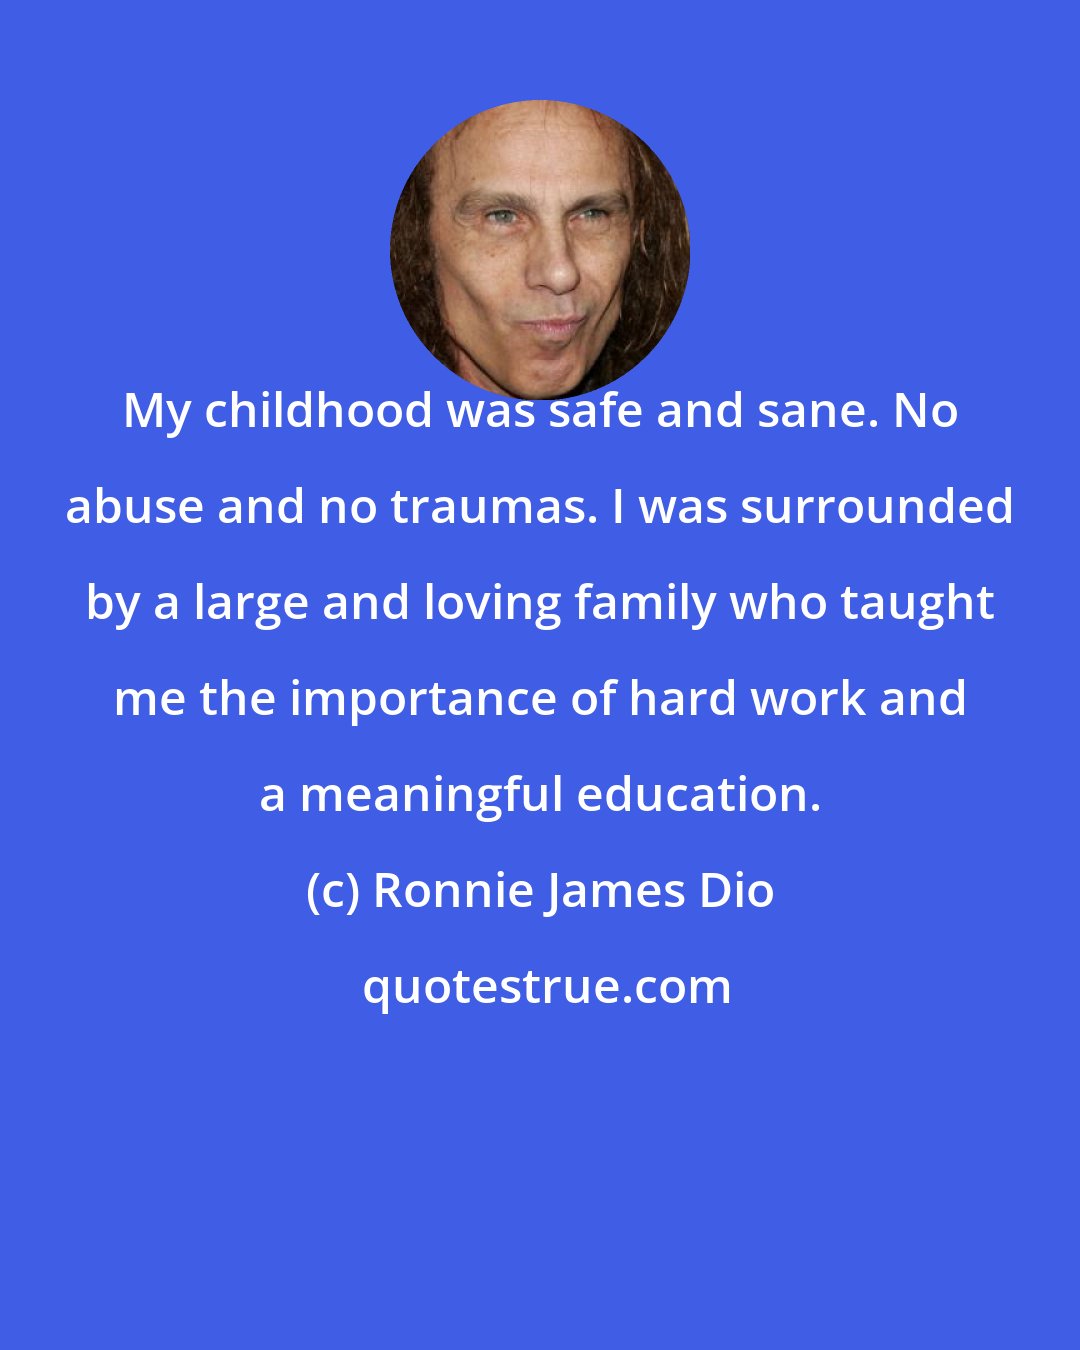 Ronnie James Dio: My childhood was safe and sane. No abuse and no traumas. I was surrounded by a large and loving family who taught me the importance of hard work and a meaningful education.